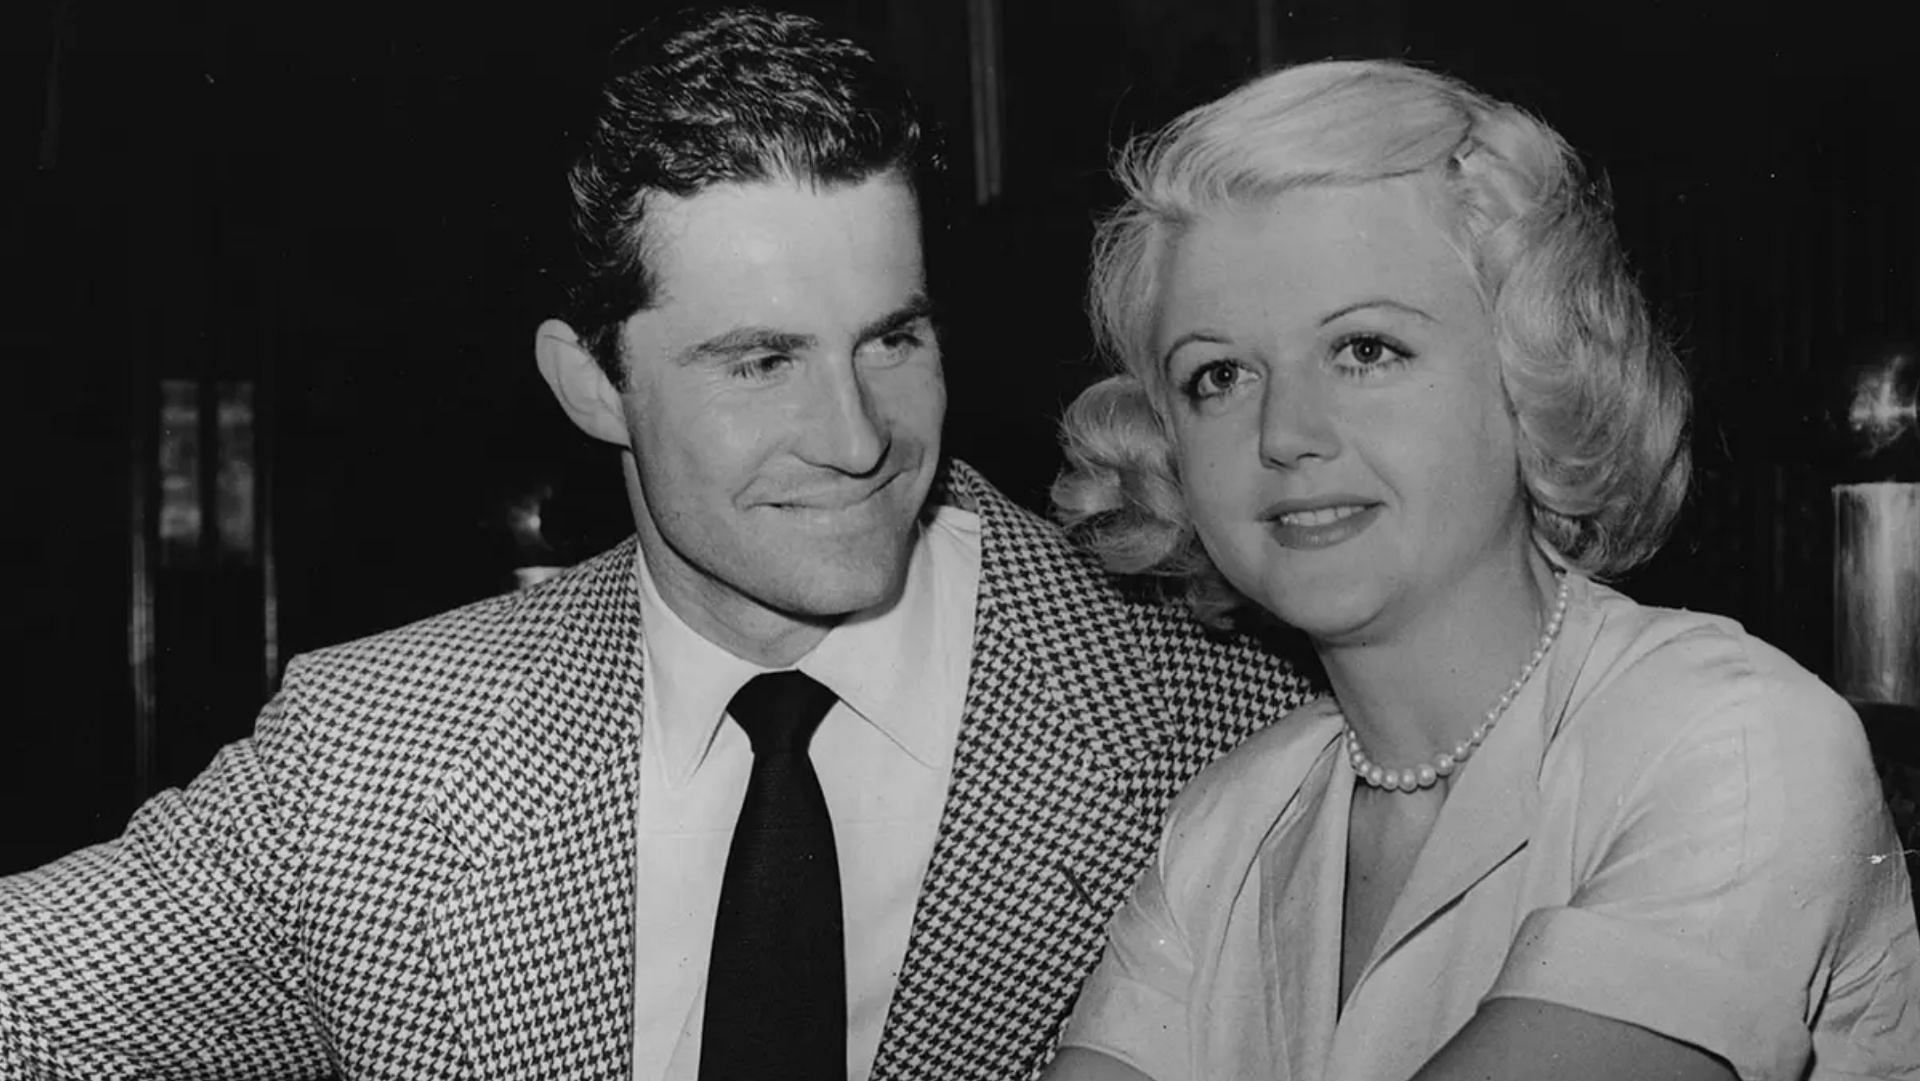 Angela Lansbury had two biological kids and a stepson from her marriage to Peter Shaw. (Image via Keystone/Getty Images)